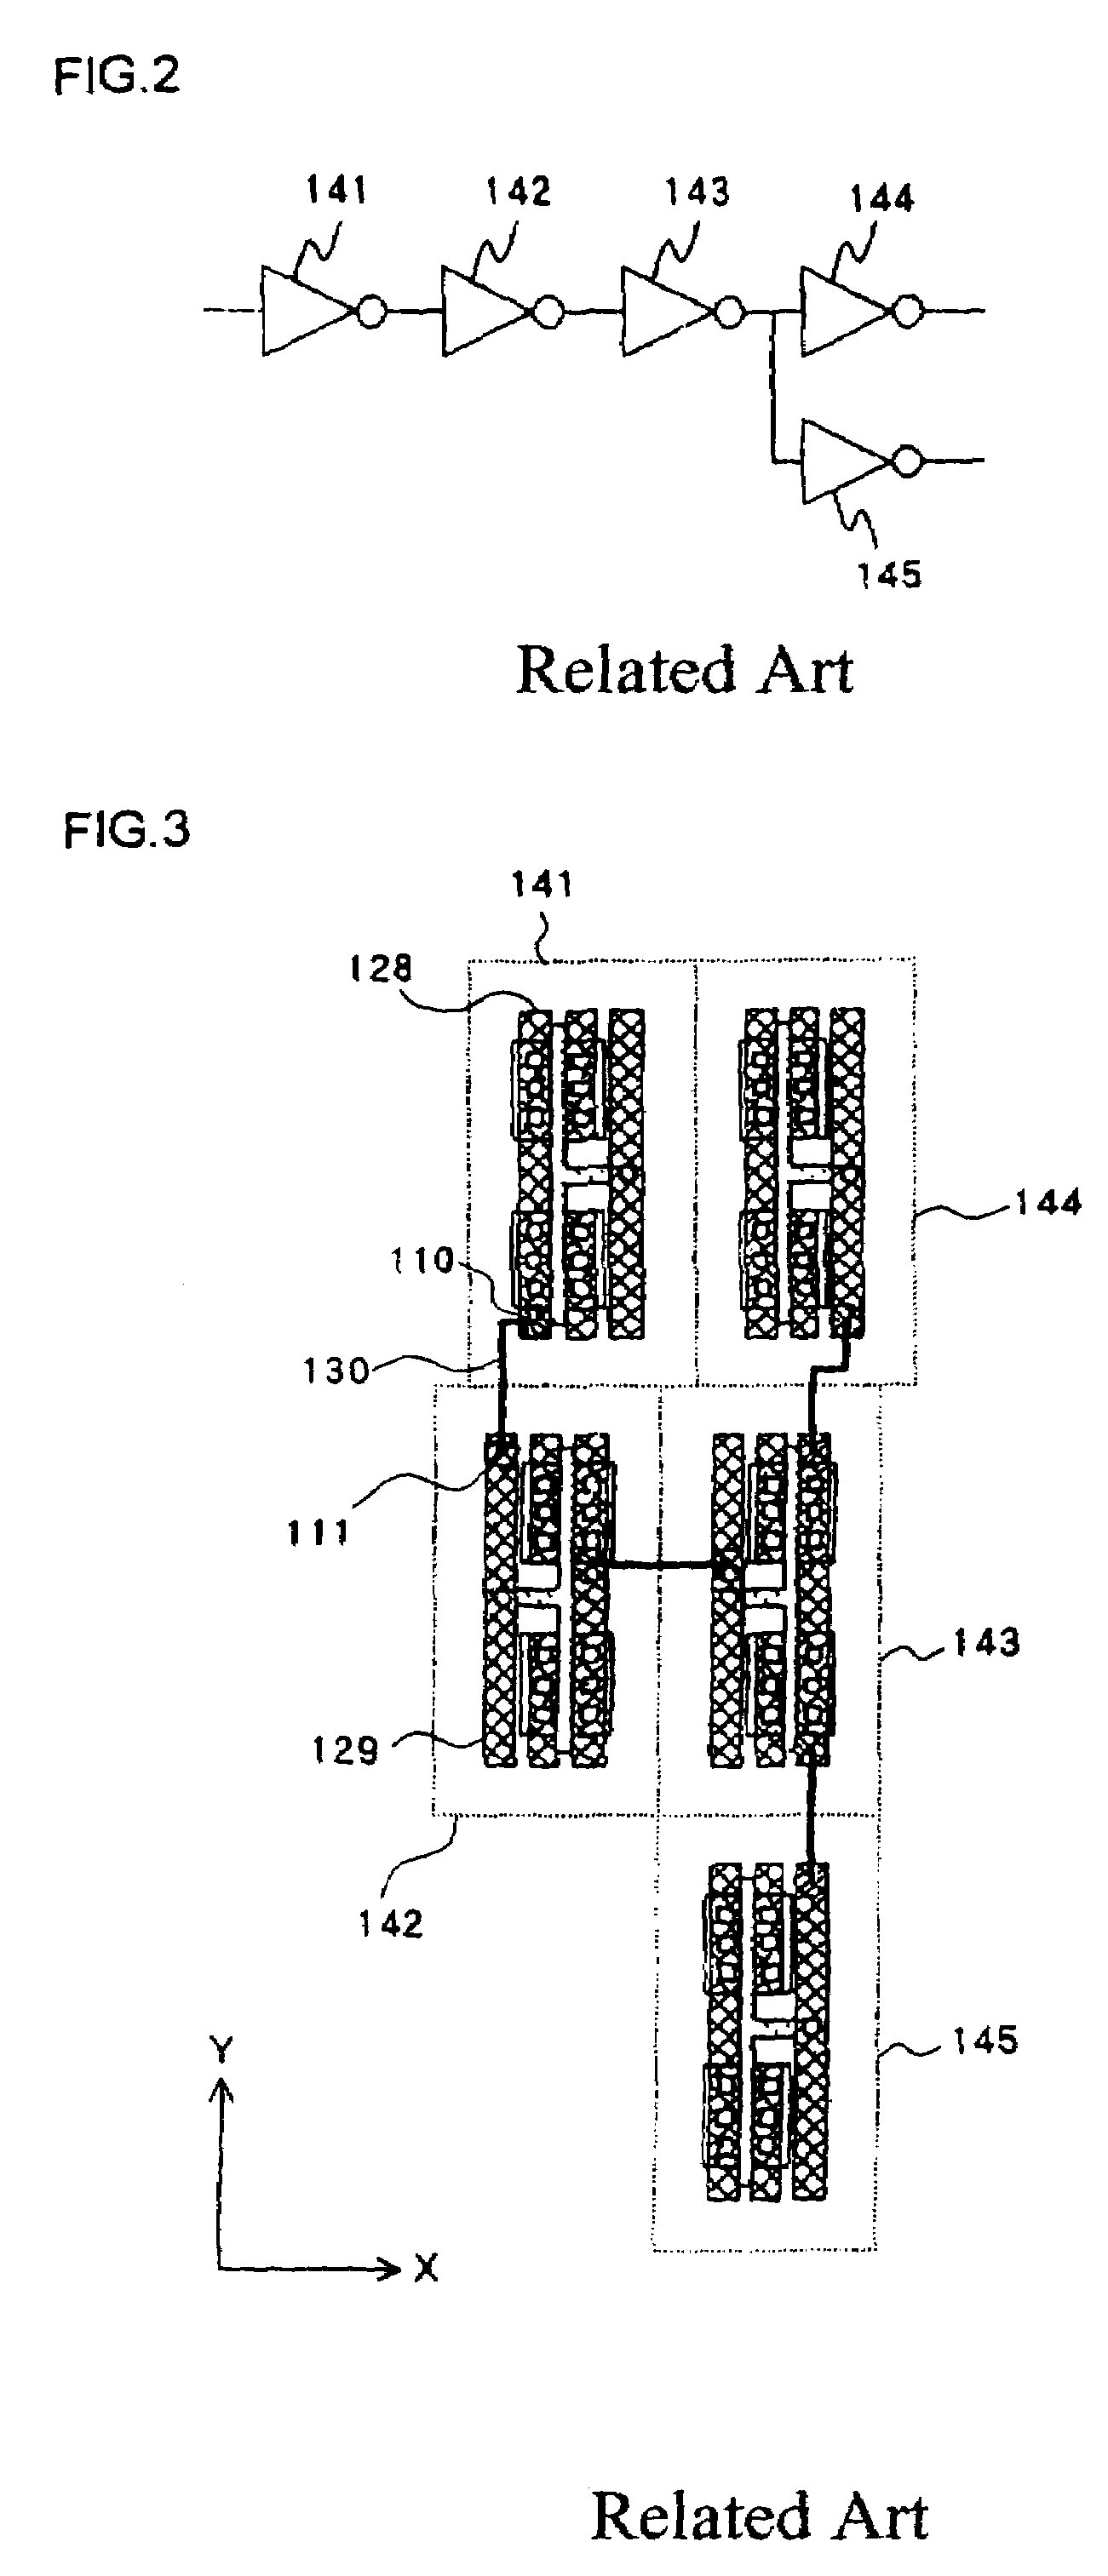 Basic cell design method for reducing the resistance of connection wiring between logic gates